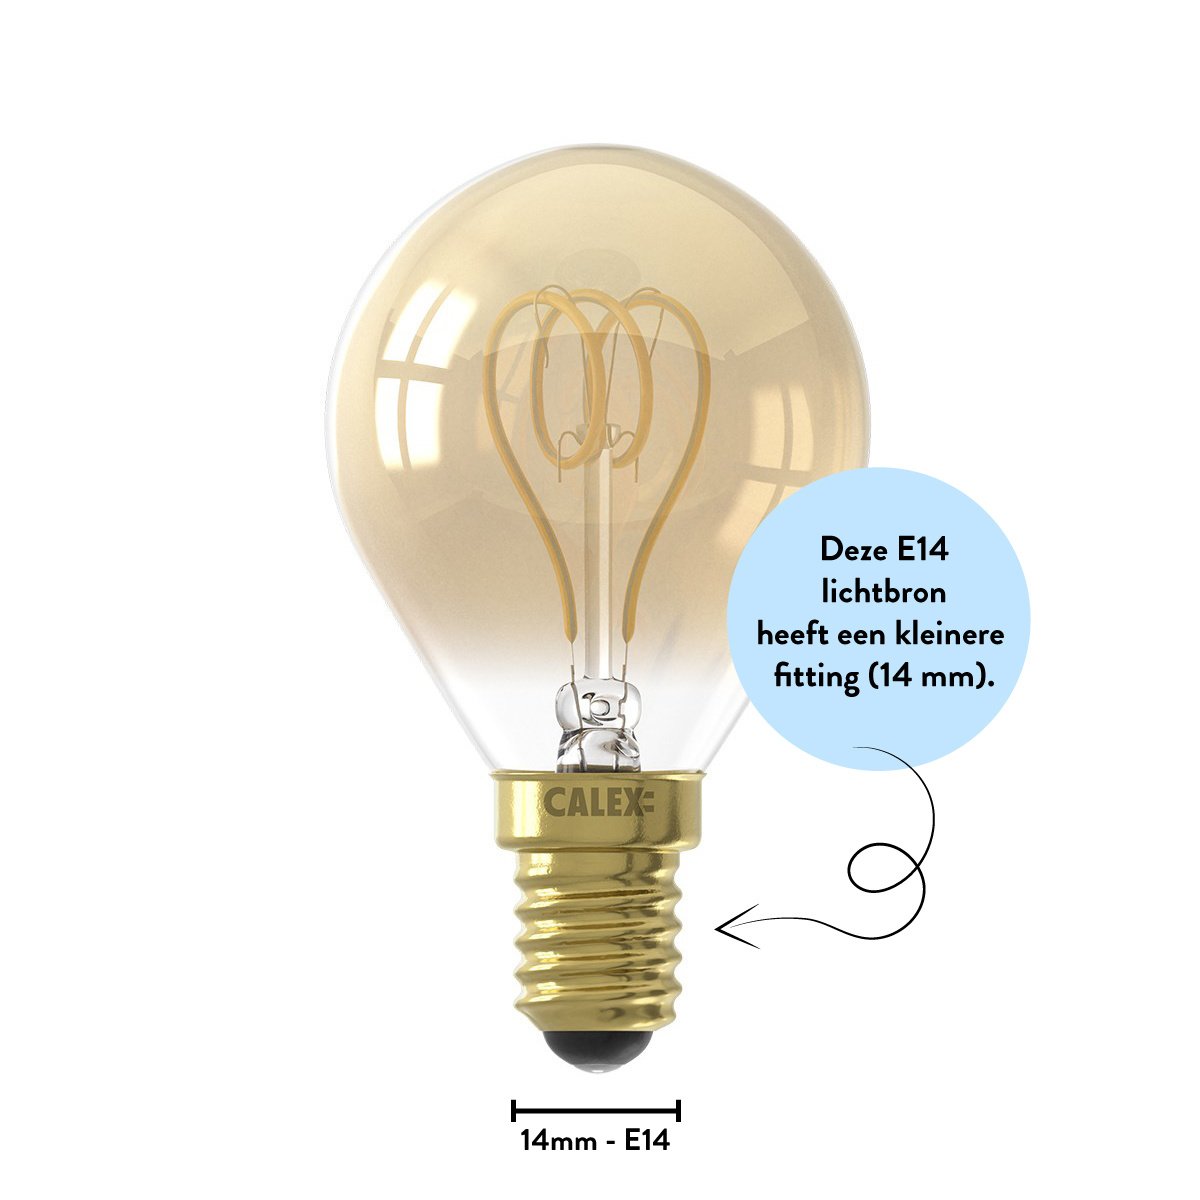 Calex source lumineuse LED Dijon - ambre - 4W - dimmable